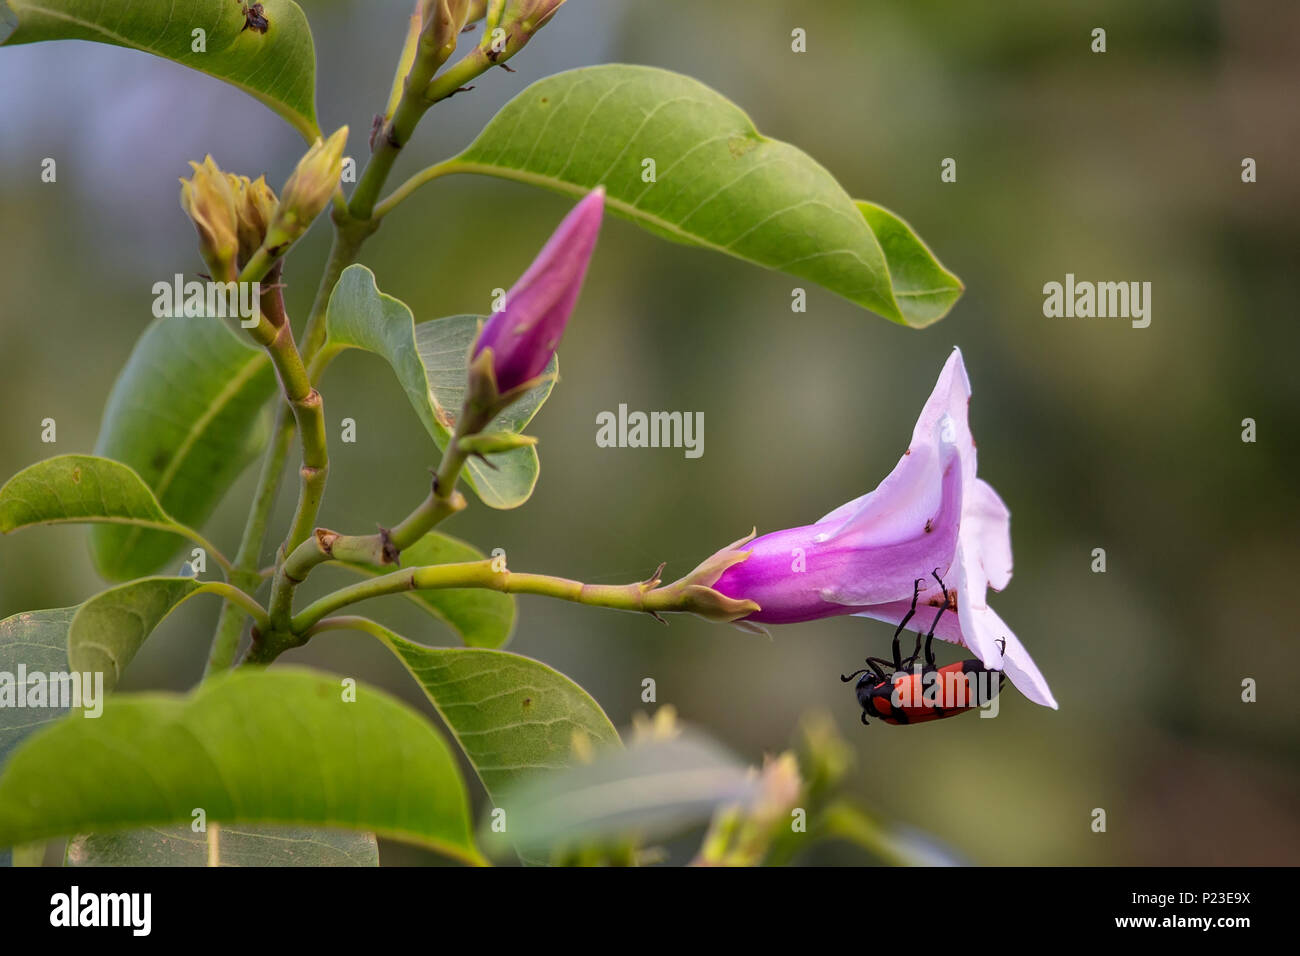 Blister beetle on a rubber vine flower in Keoladeo Ghana National Park, Bharatpur, Rajasthan, India. Stock Photo